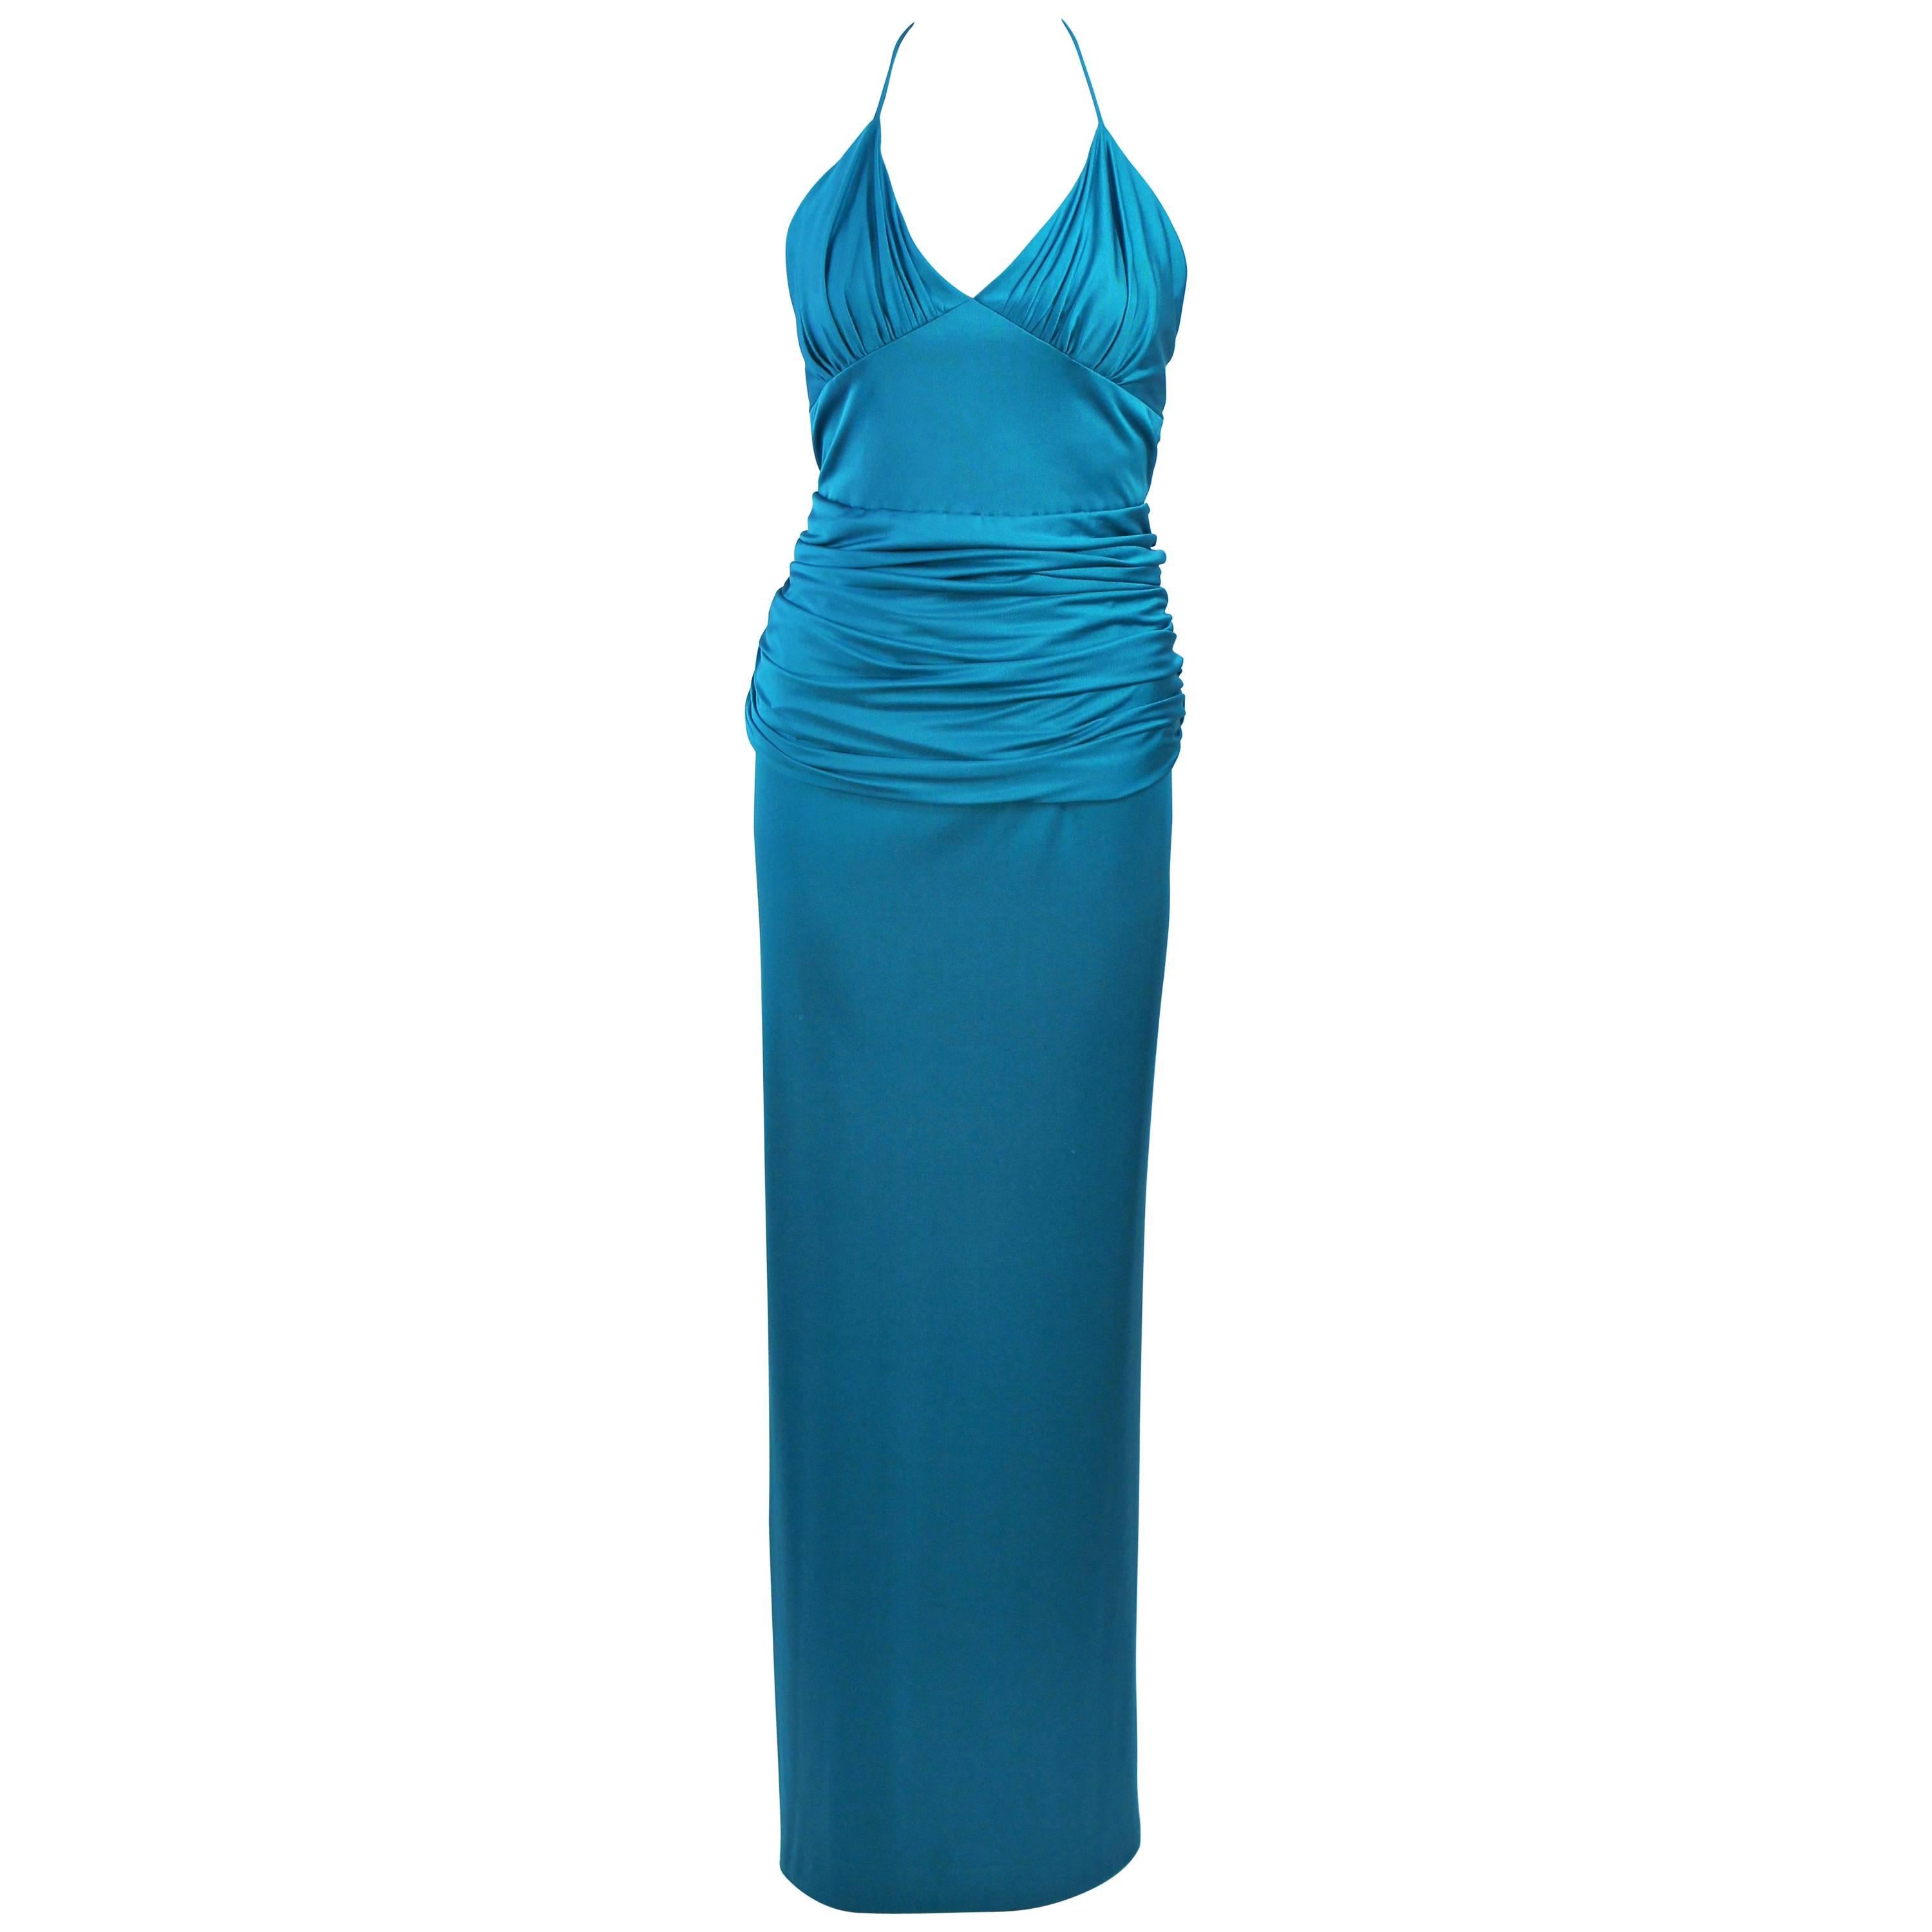 ELIZABETH MASON COUTURE Turquoise Silk Jersey Halter Gown Made to Order